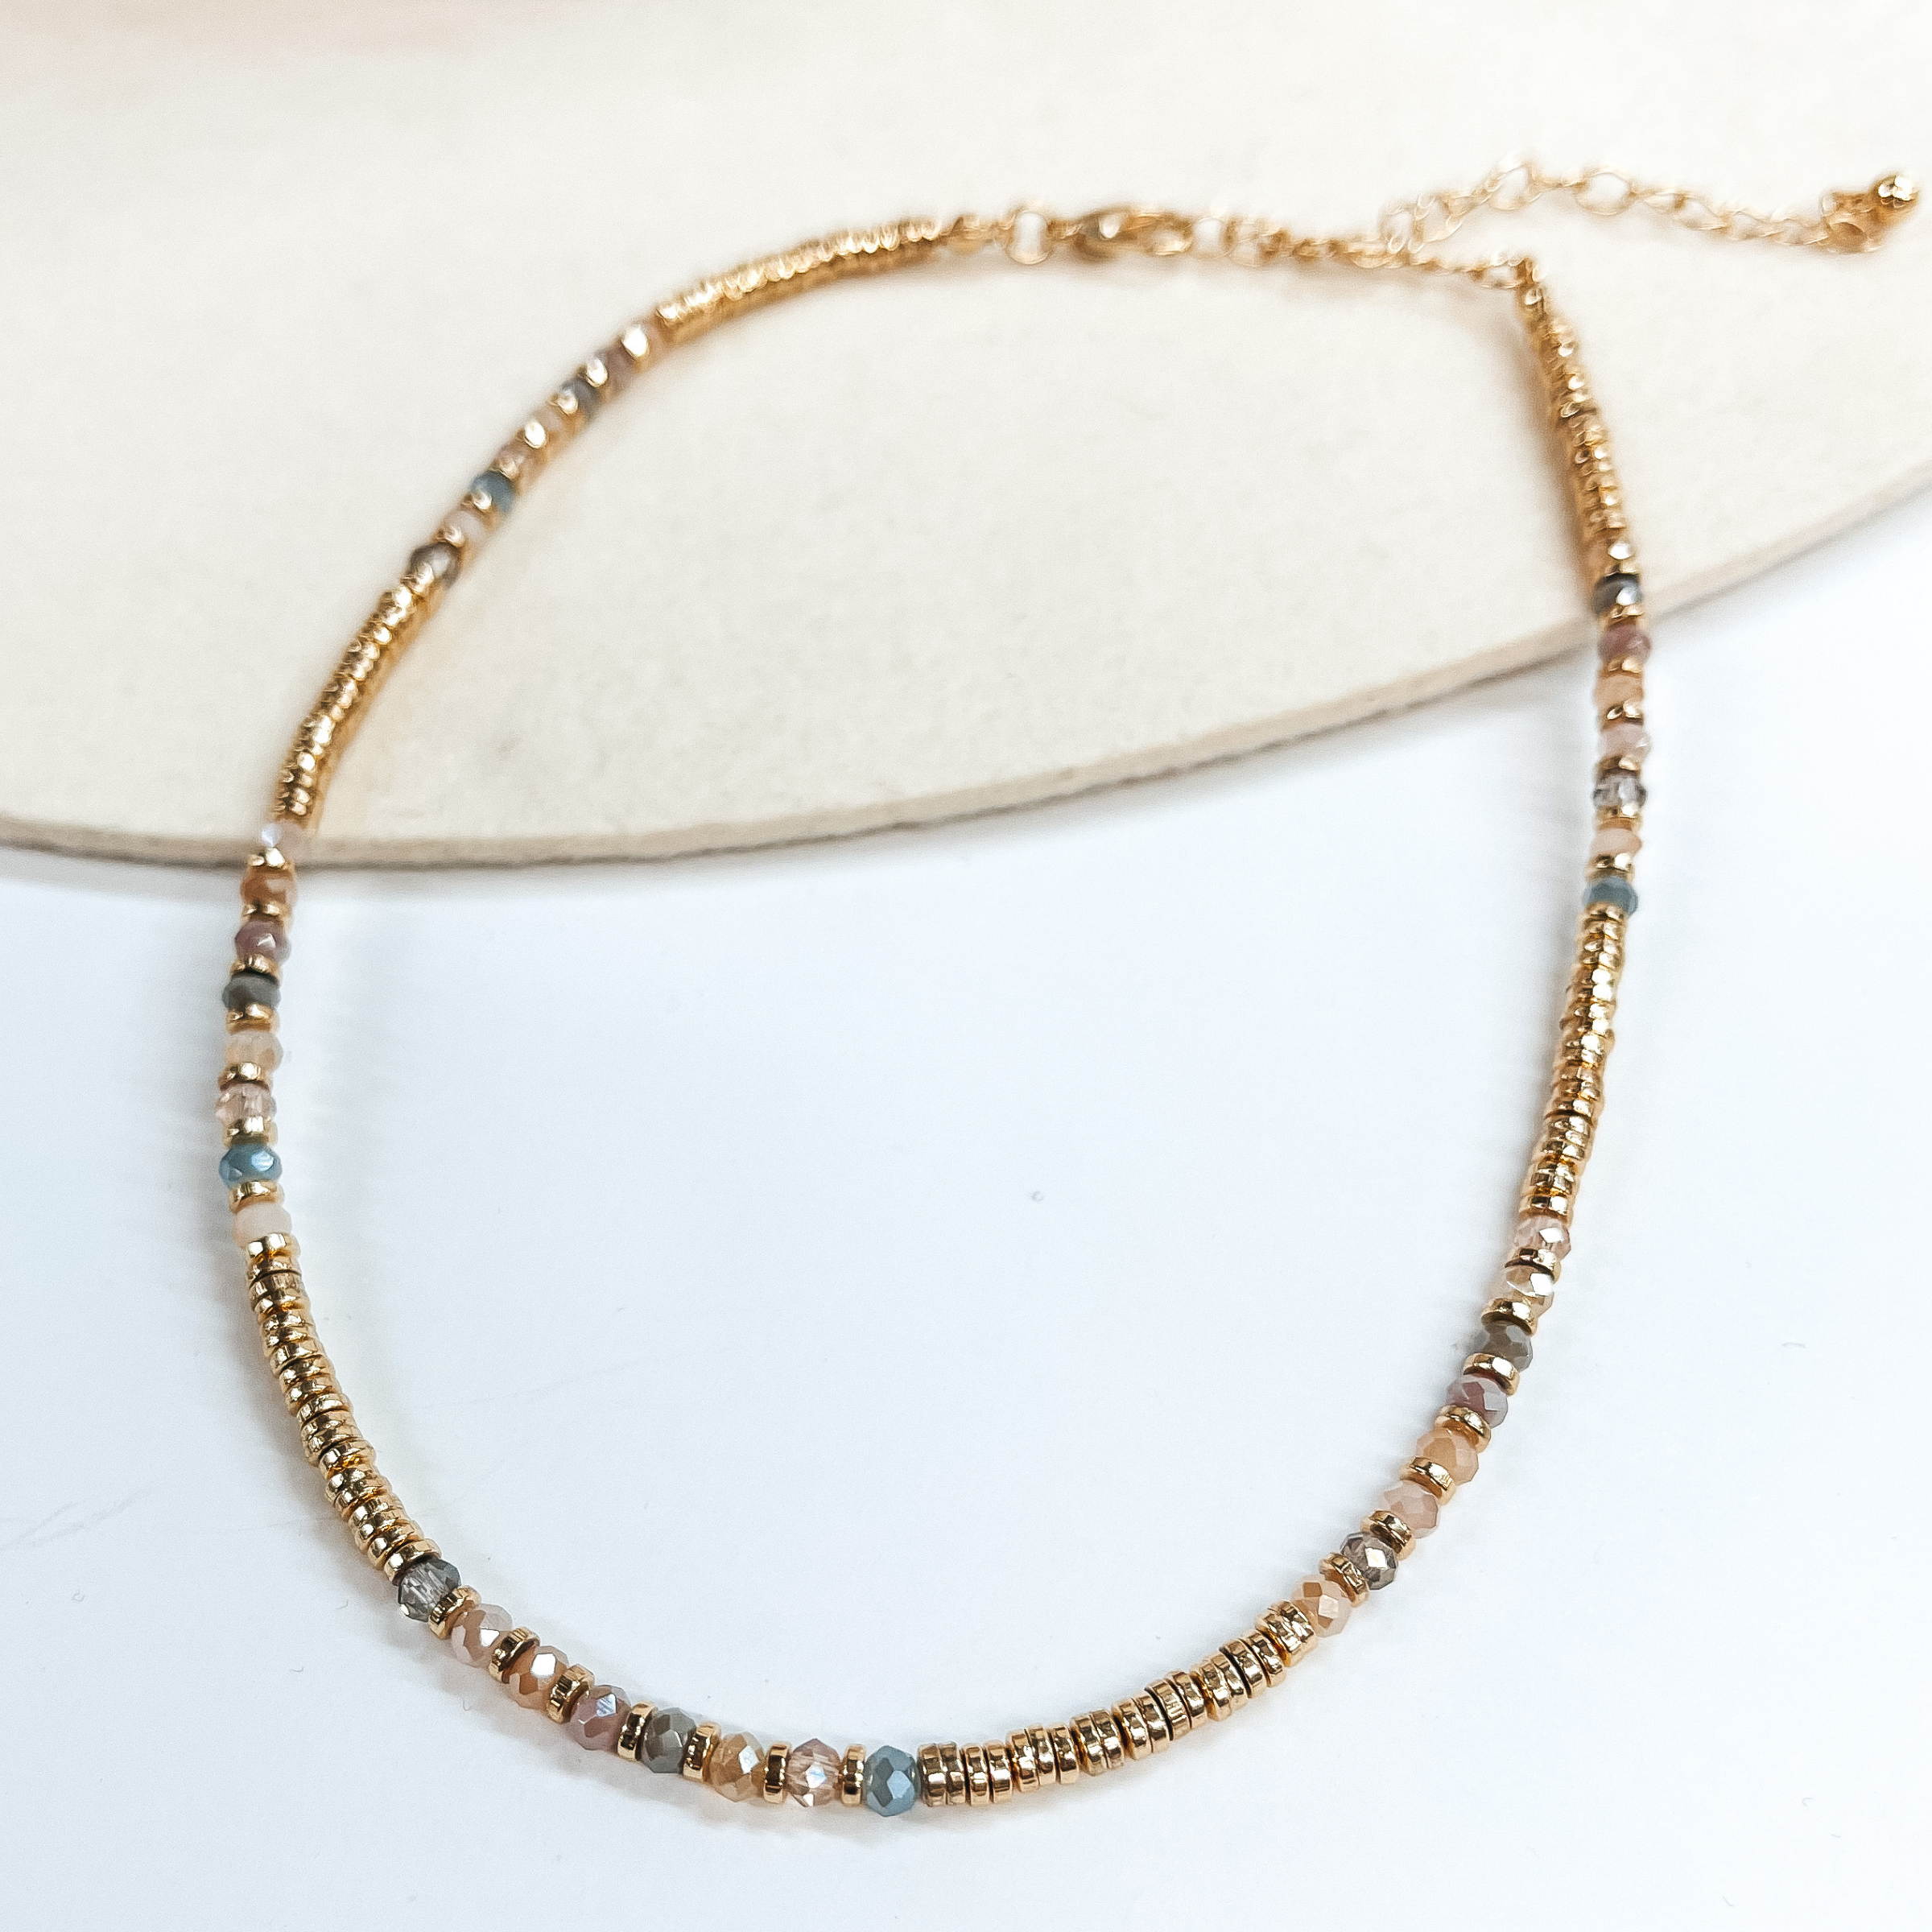 Crystal and Disc Beaded Choker Necklace with Gold Spacers in Neutral Mix - Giddy Up Glamour Boutique